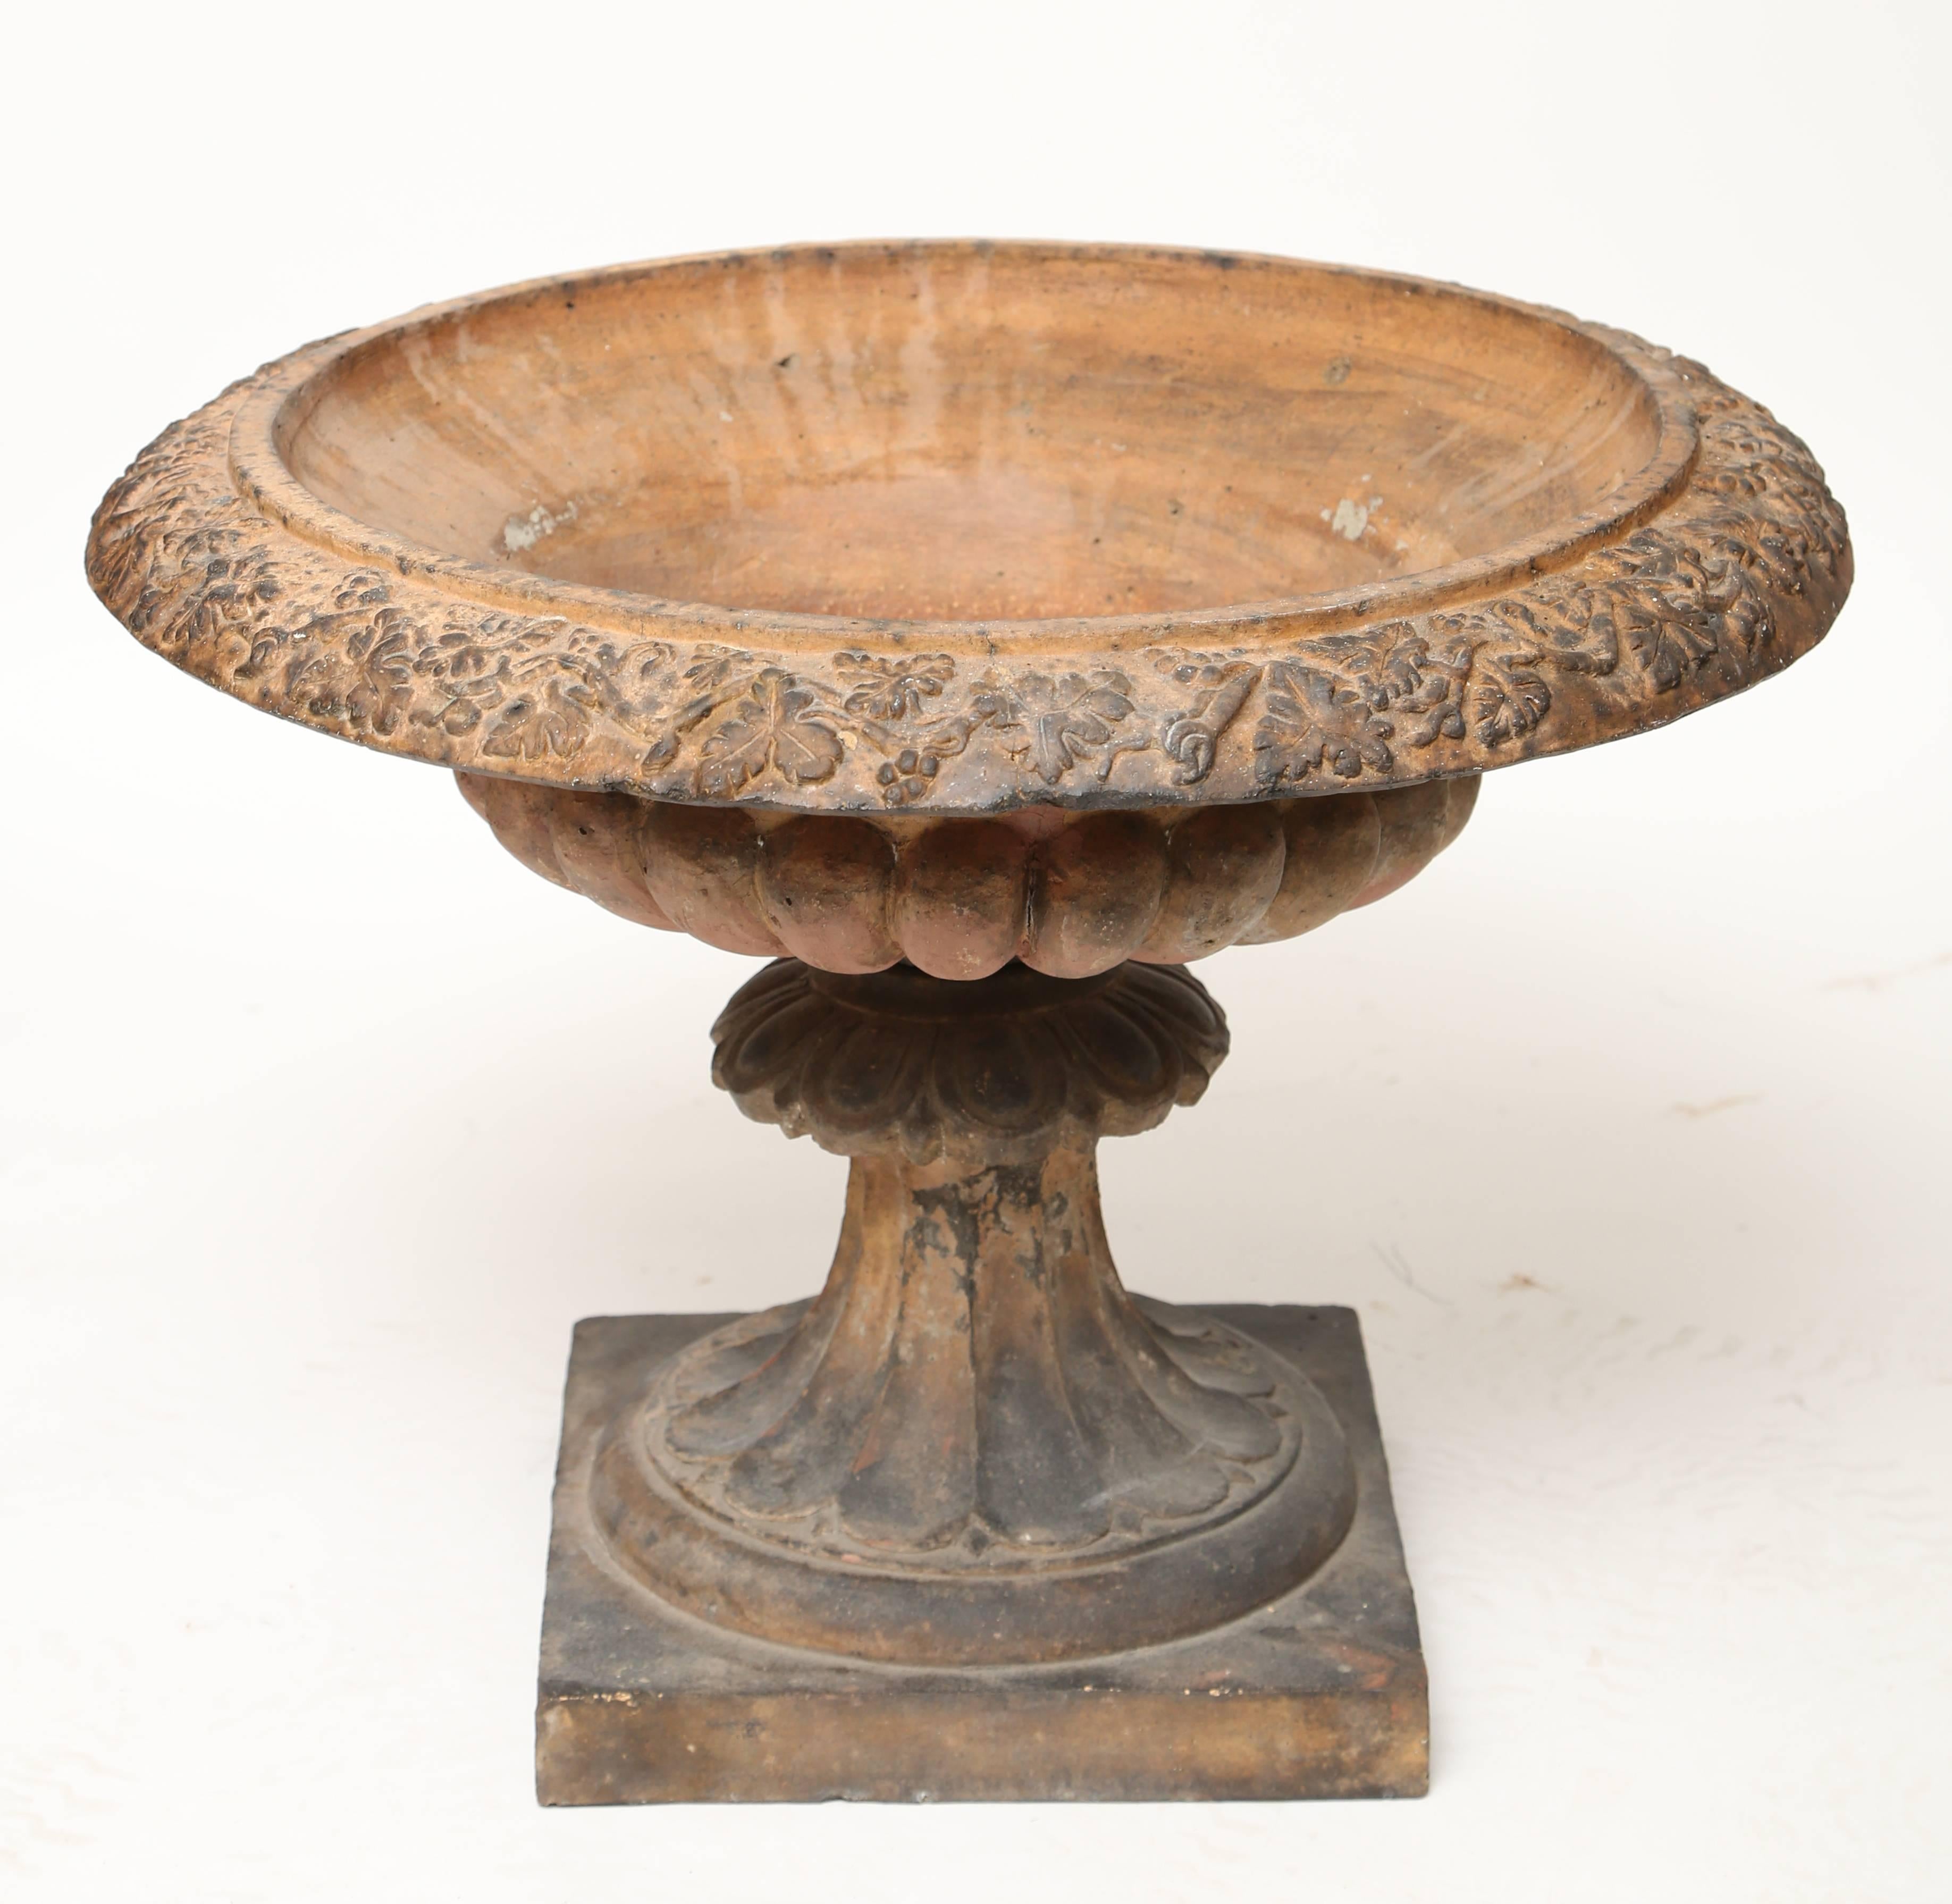 Neoclassical Revival Wide Mouthed Terracotta Garden Urn on Stand-England, Nineteenth Century For Sale